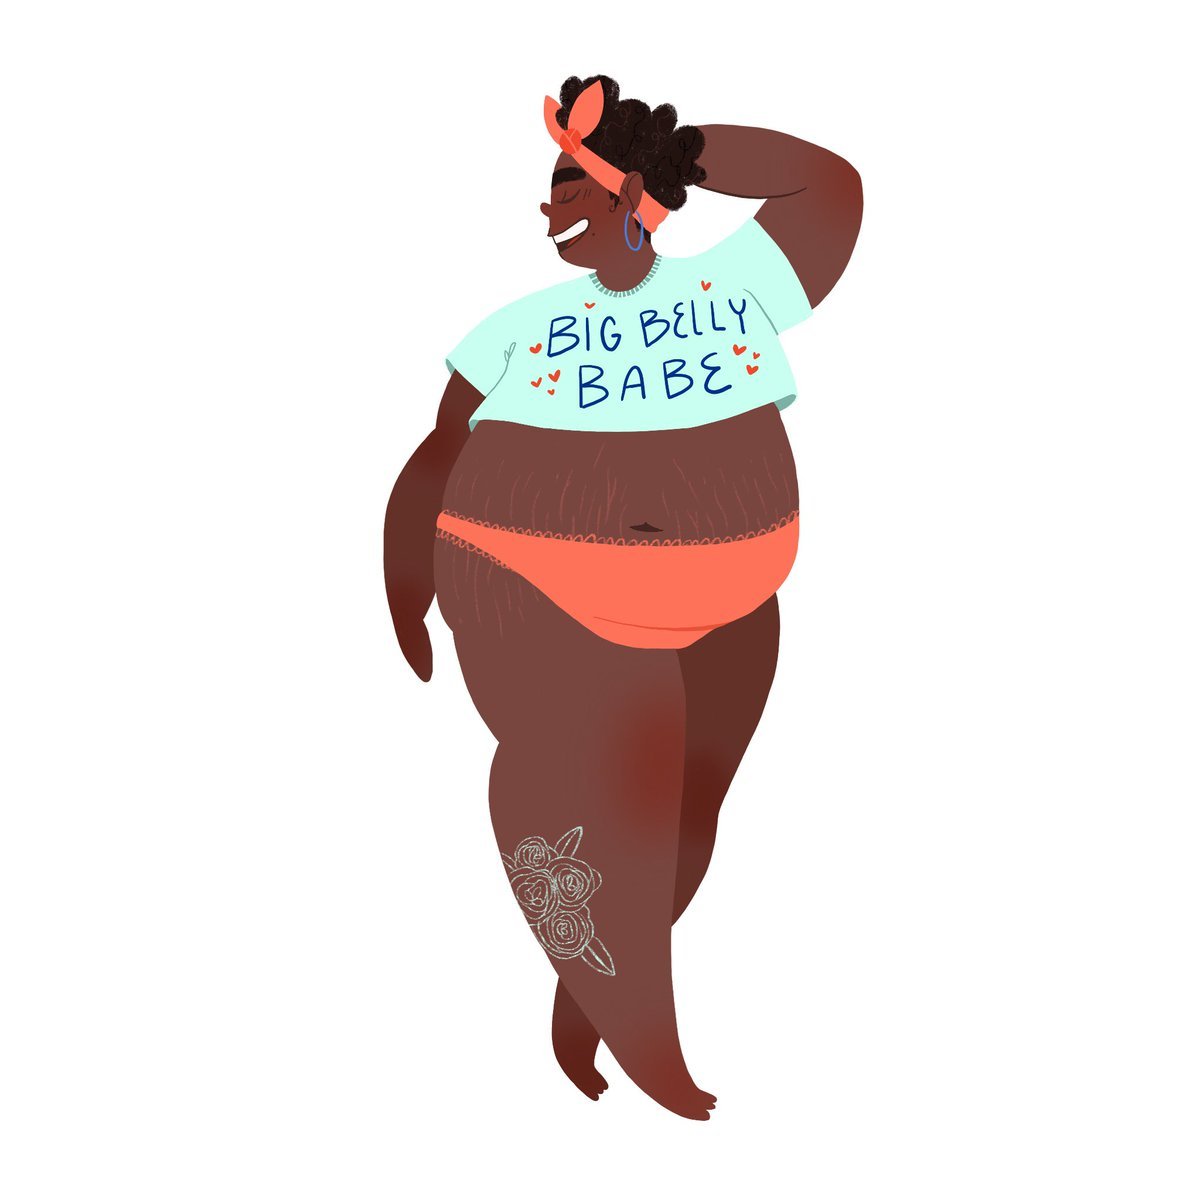 Plus Size Illustrations from Shelby Bergen- Big Belly Babe